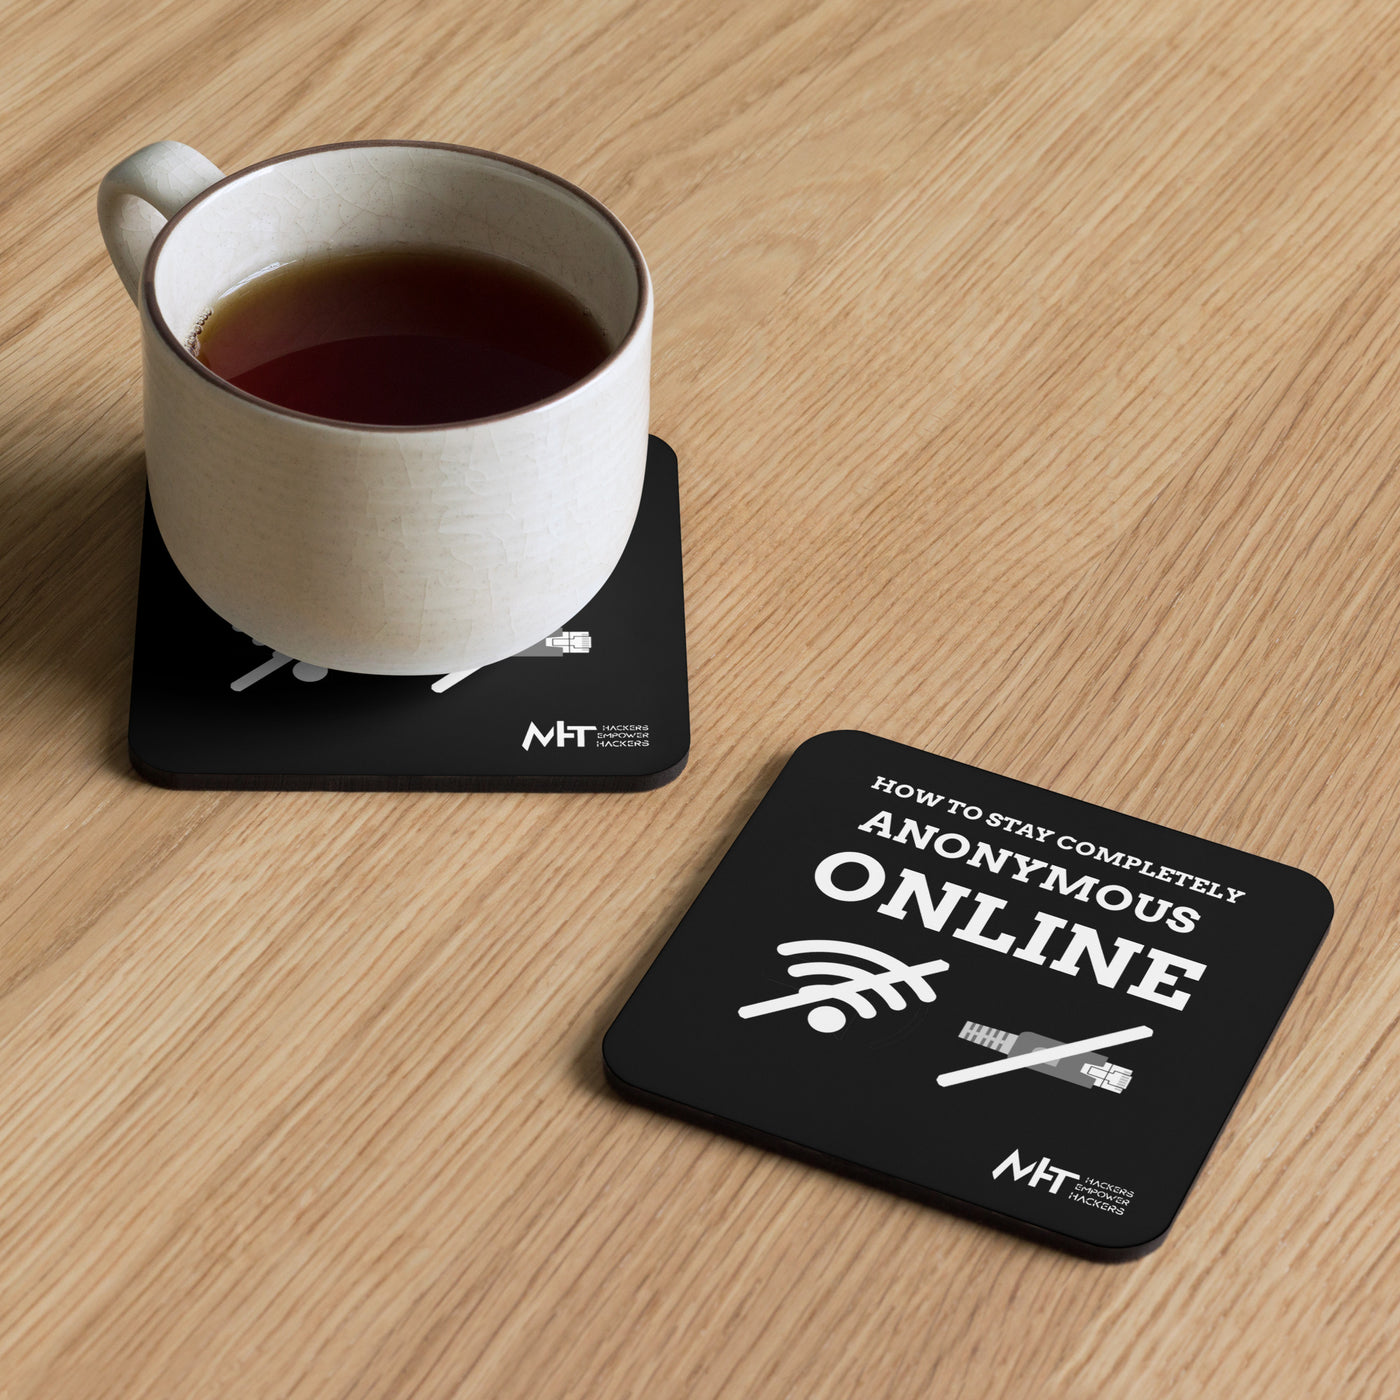 Stay anonymous online - Cork-back coaster